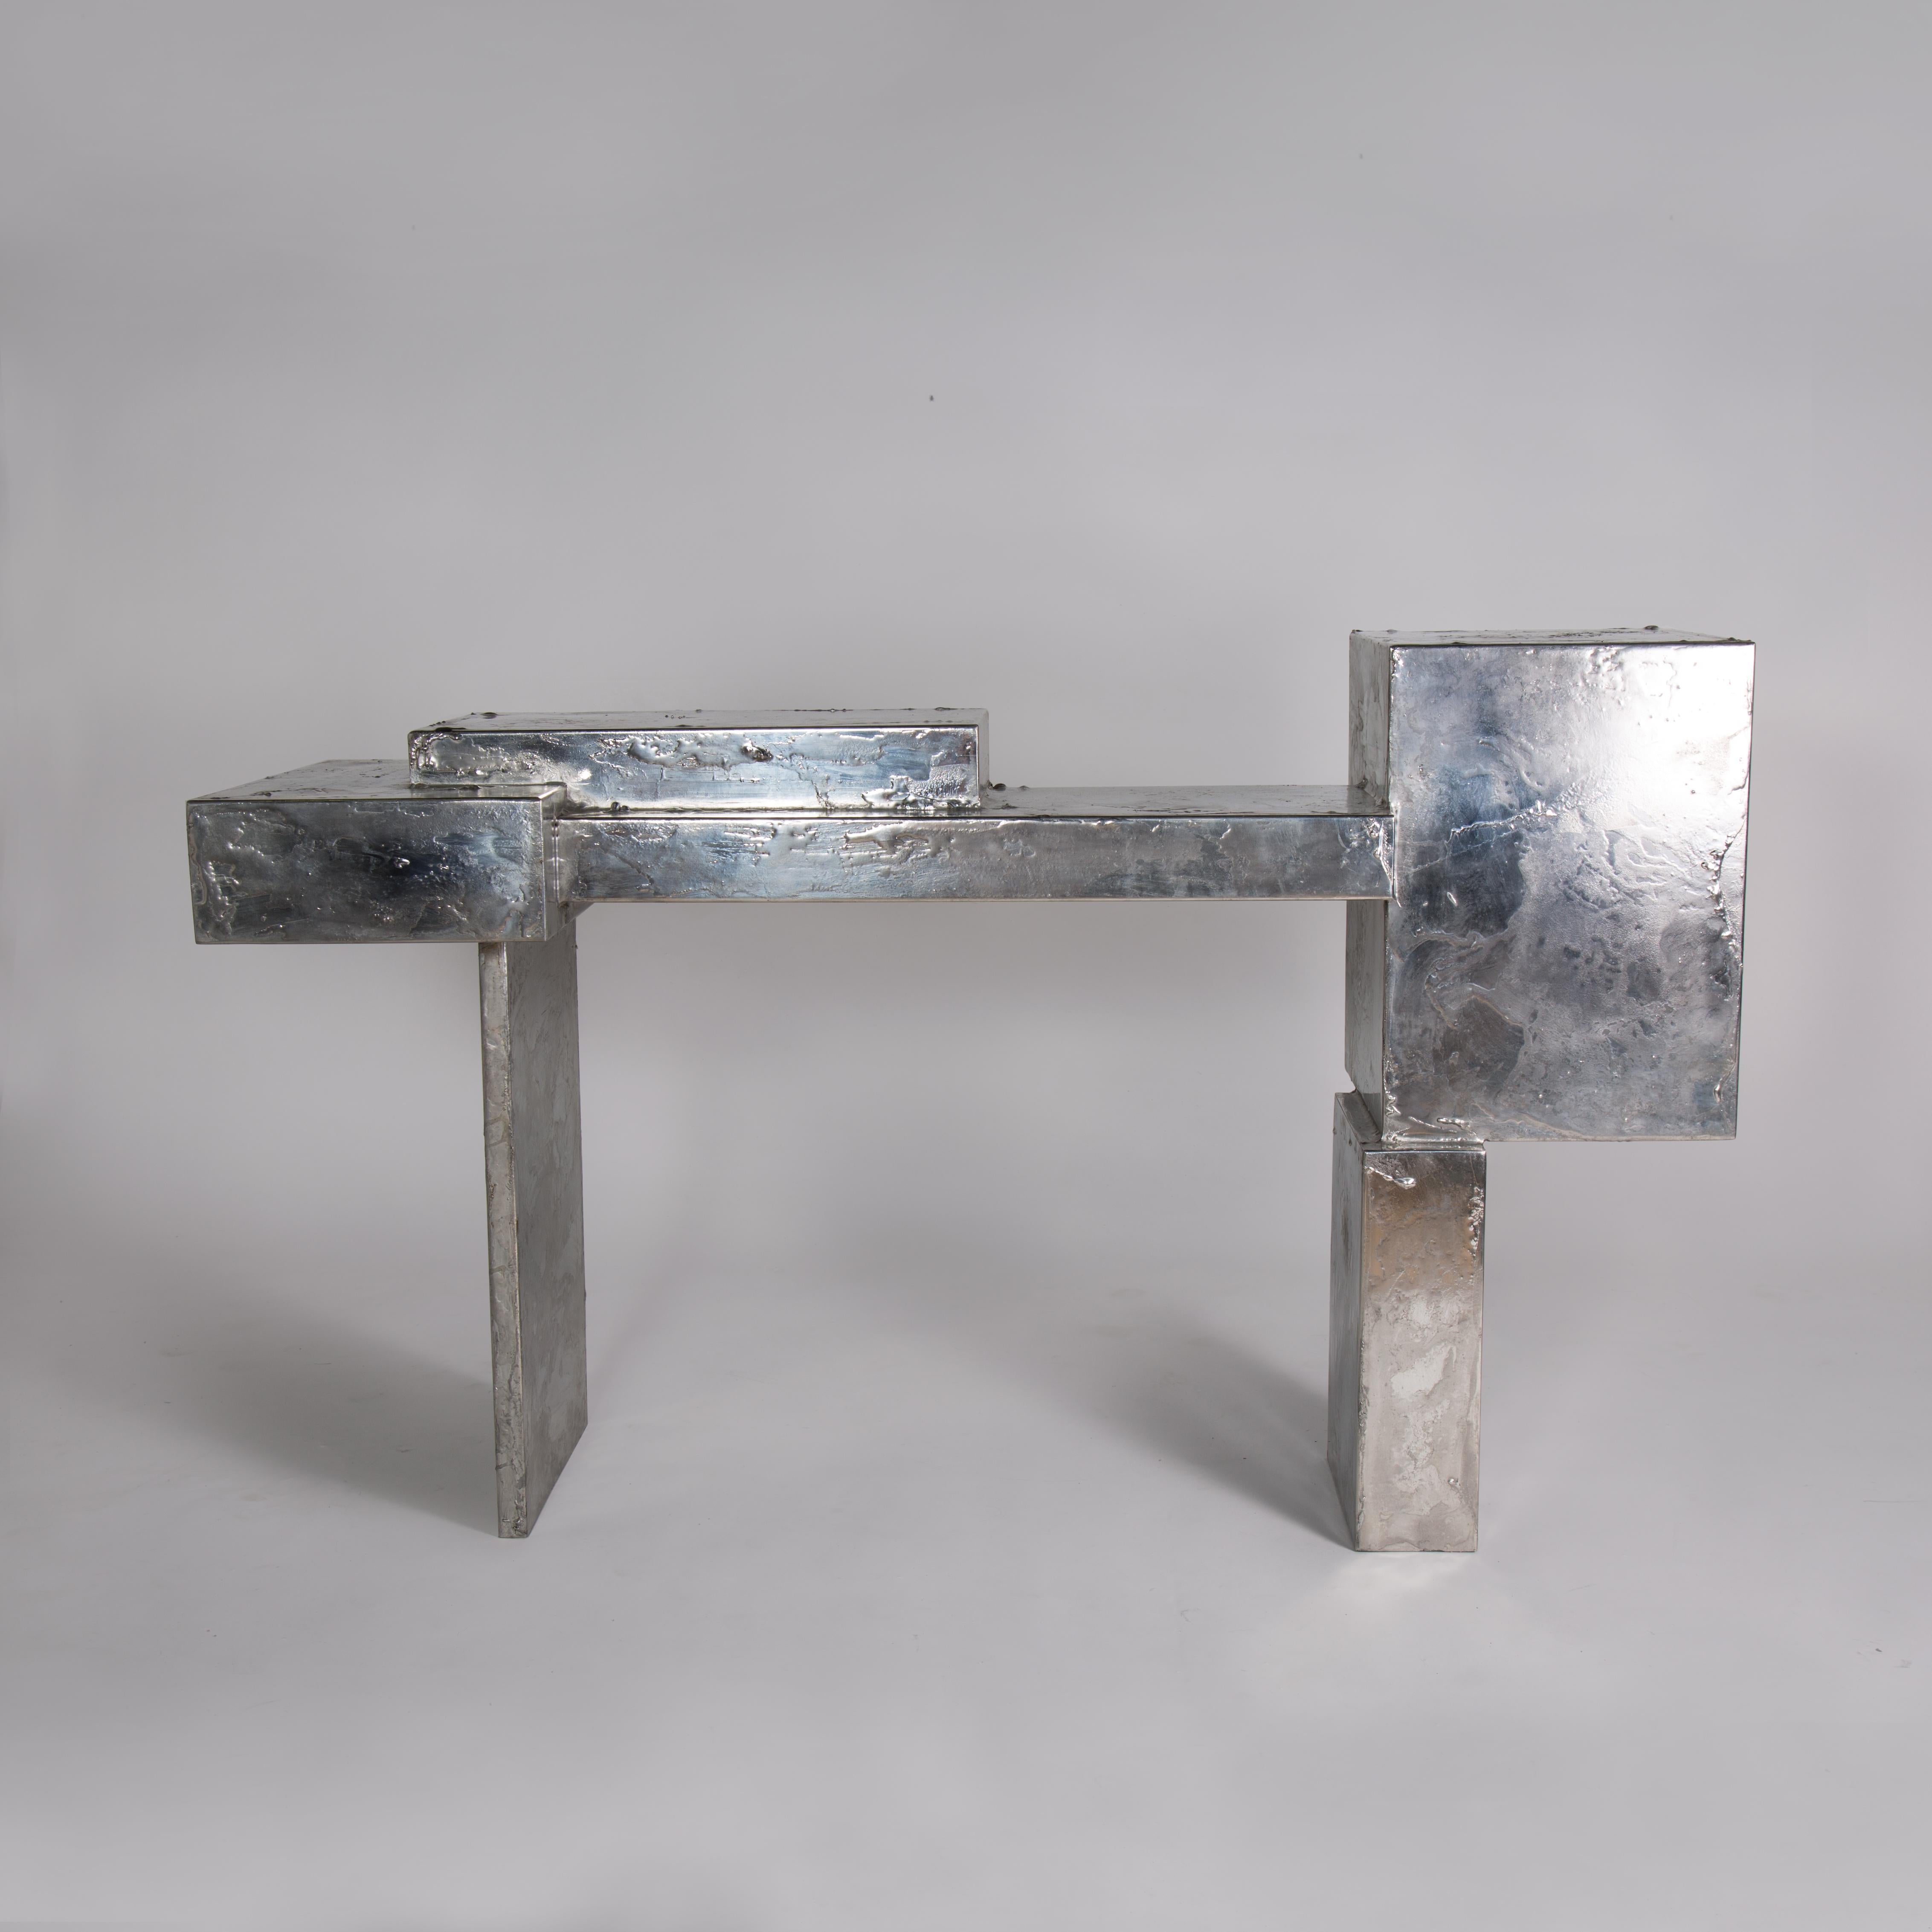 Pewter console by Gentner Design
Dimensions: D 137 x W 43 x H 84 cm
Materials: pewter on steel.

The Pewter Collection is a family of furniture pieces defined by their materiality and formal qualities. One Crucible at a time, pewter is melted into